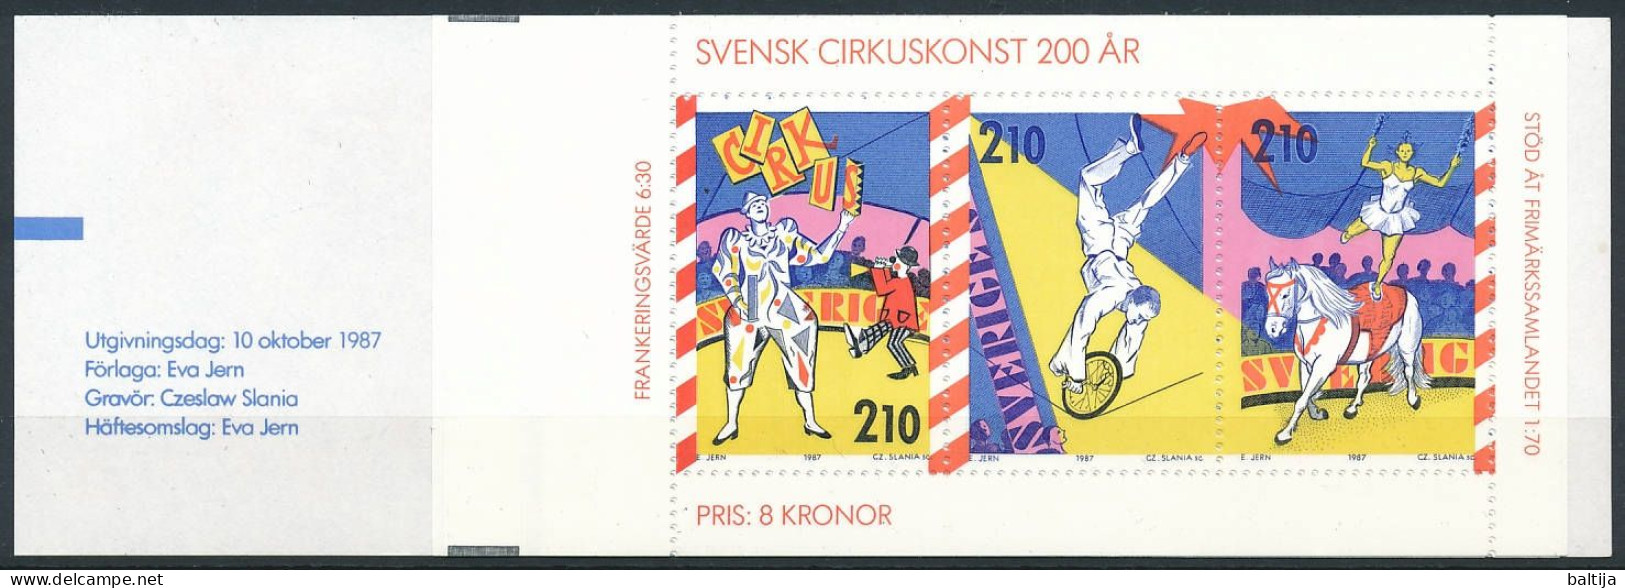 H.379 Booklet ** MNH / Circus In Sweden 200 Years Anniversary, Clowns, Tightrope Artist, Horse Dressage - Cirque